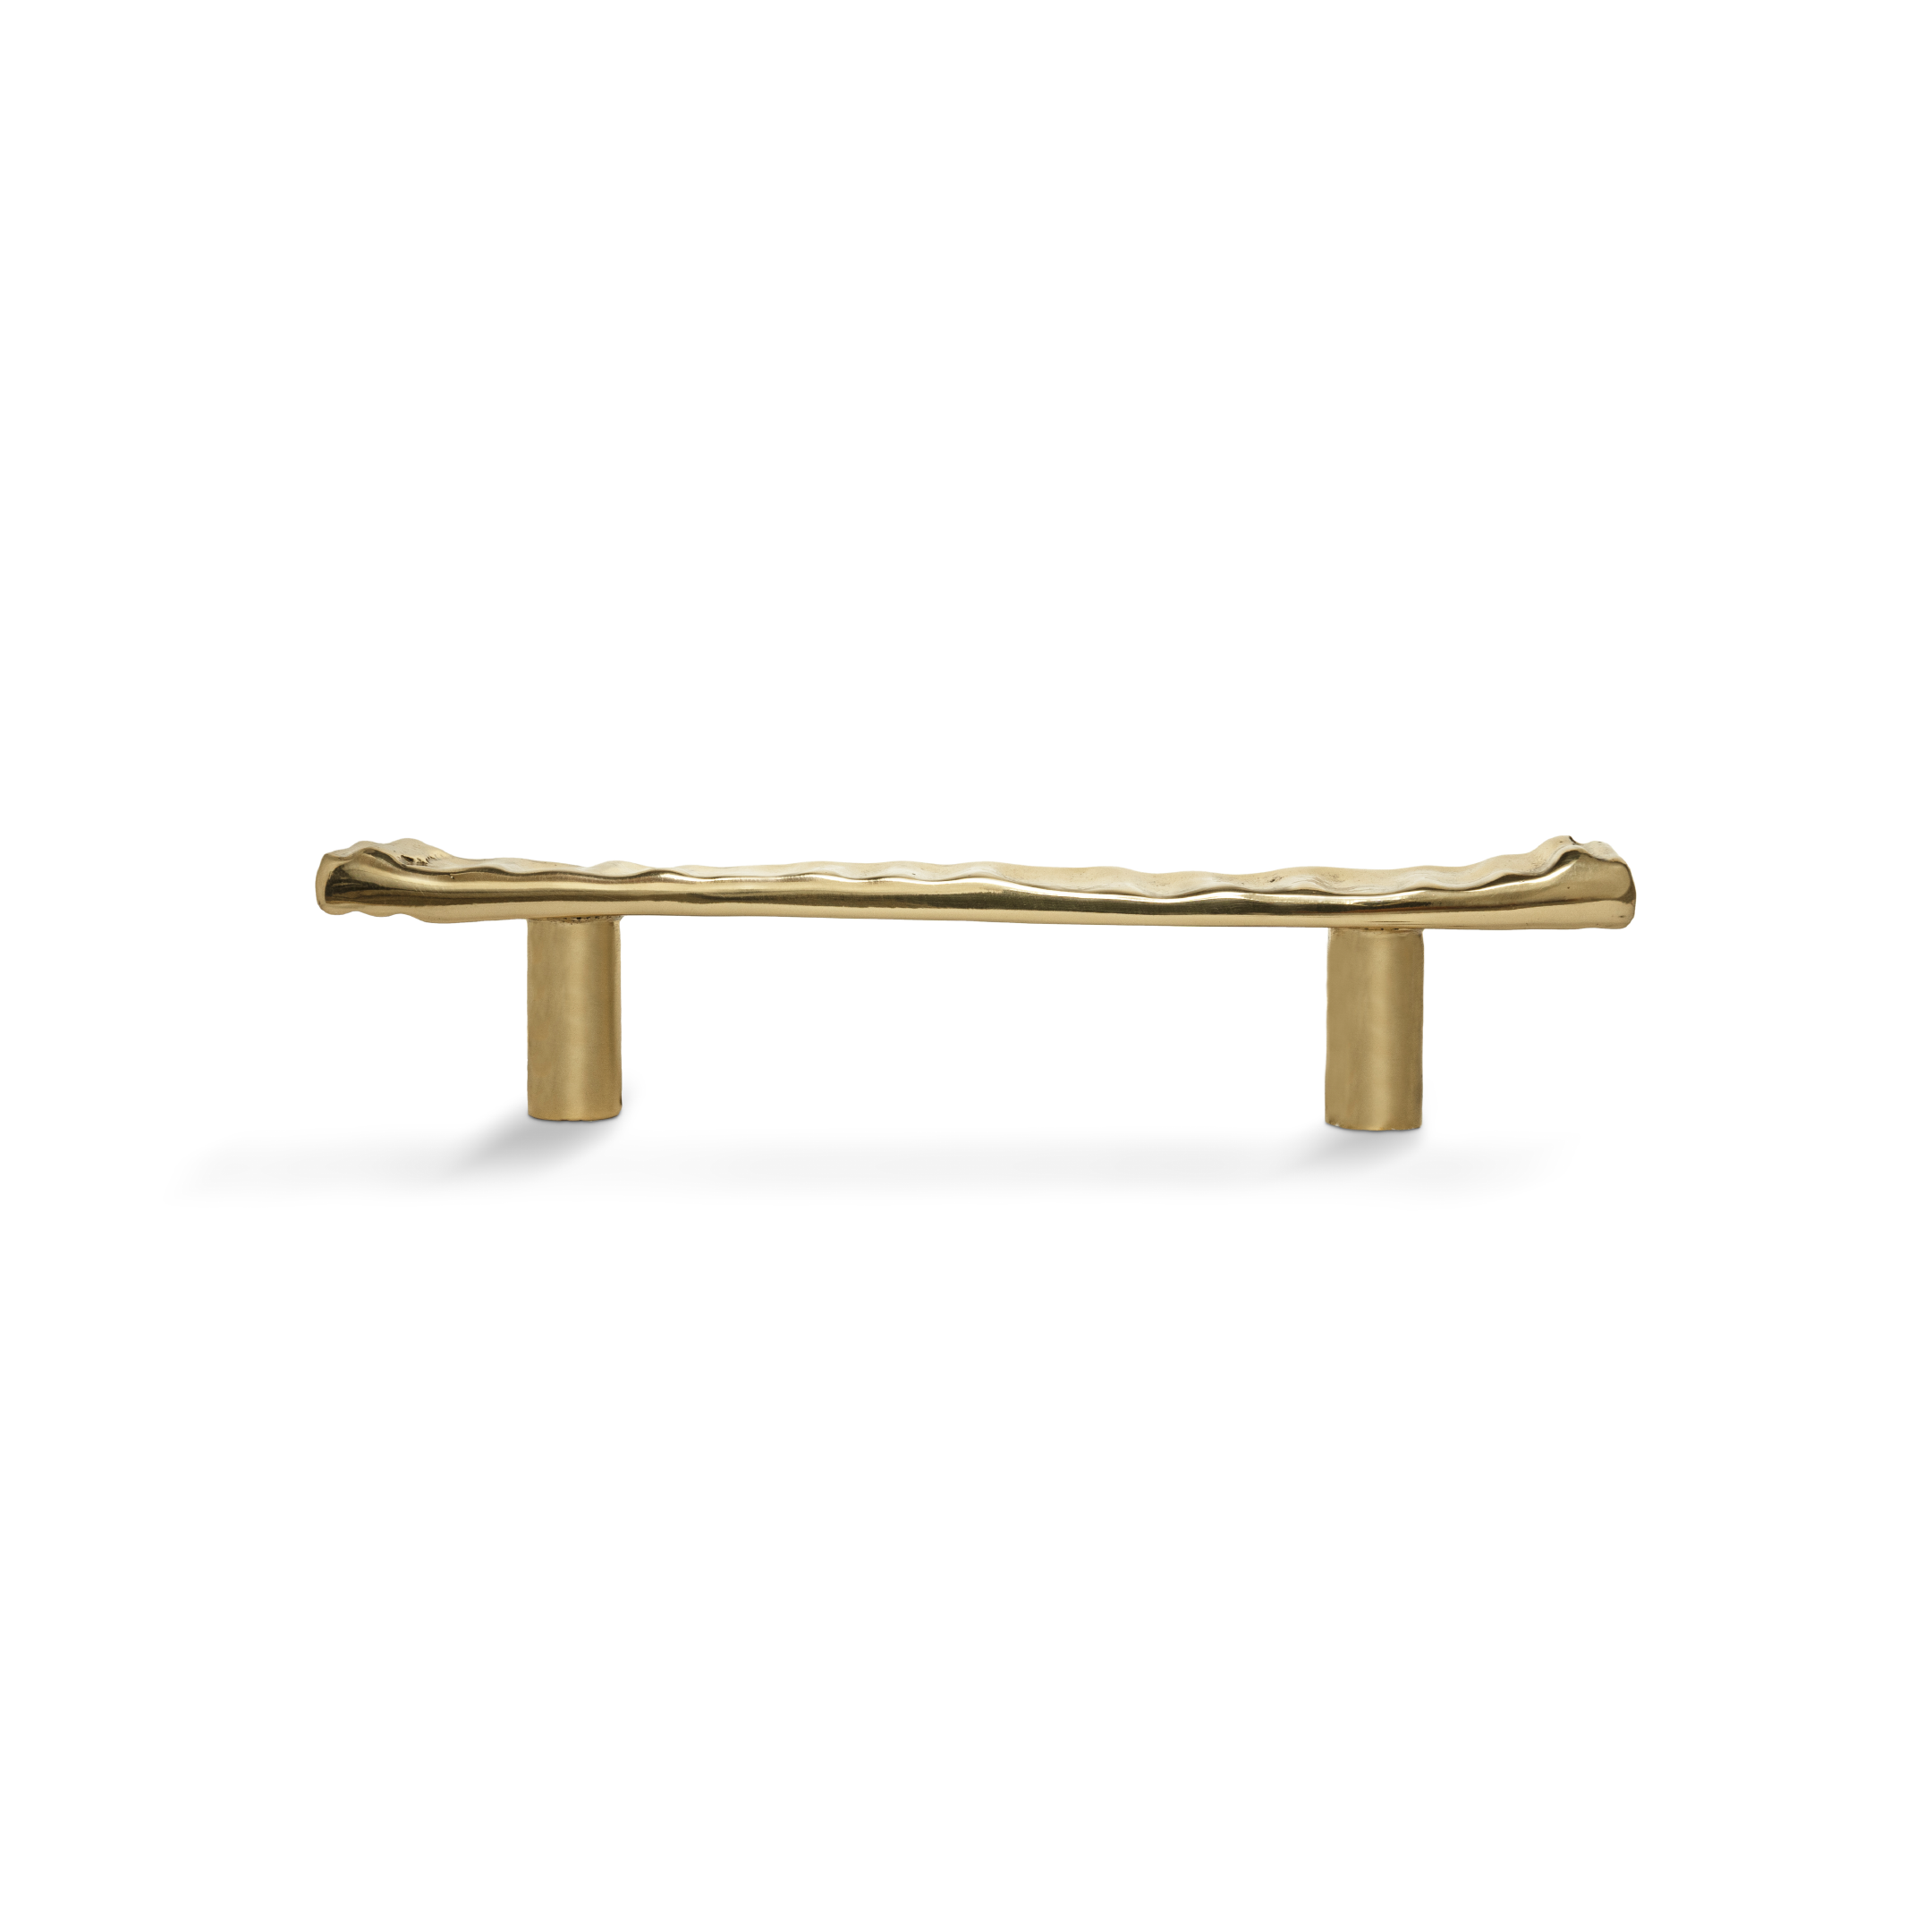 THE BEST OF AUTUMN - PULLCAST TOP SELLERS OF THE SEASON - baruka drawer handle